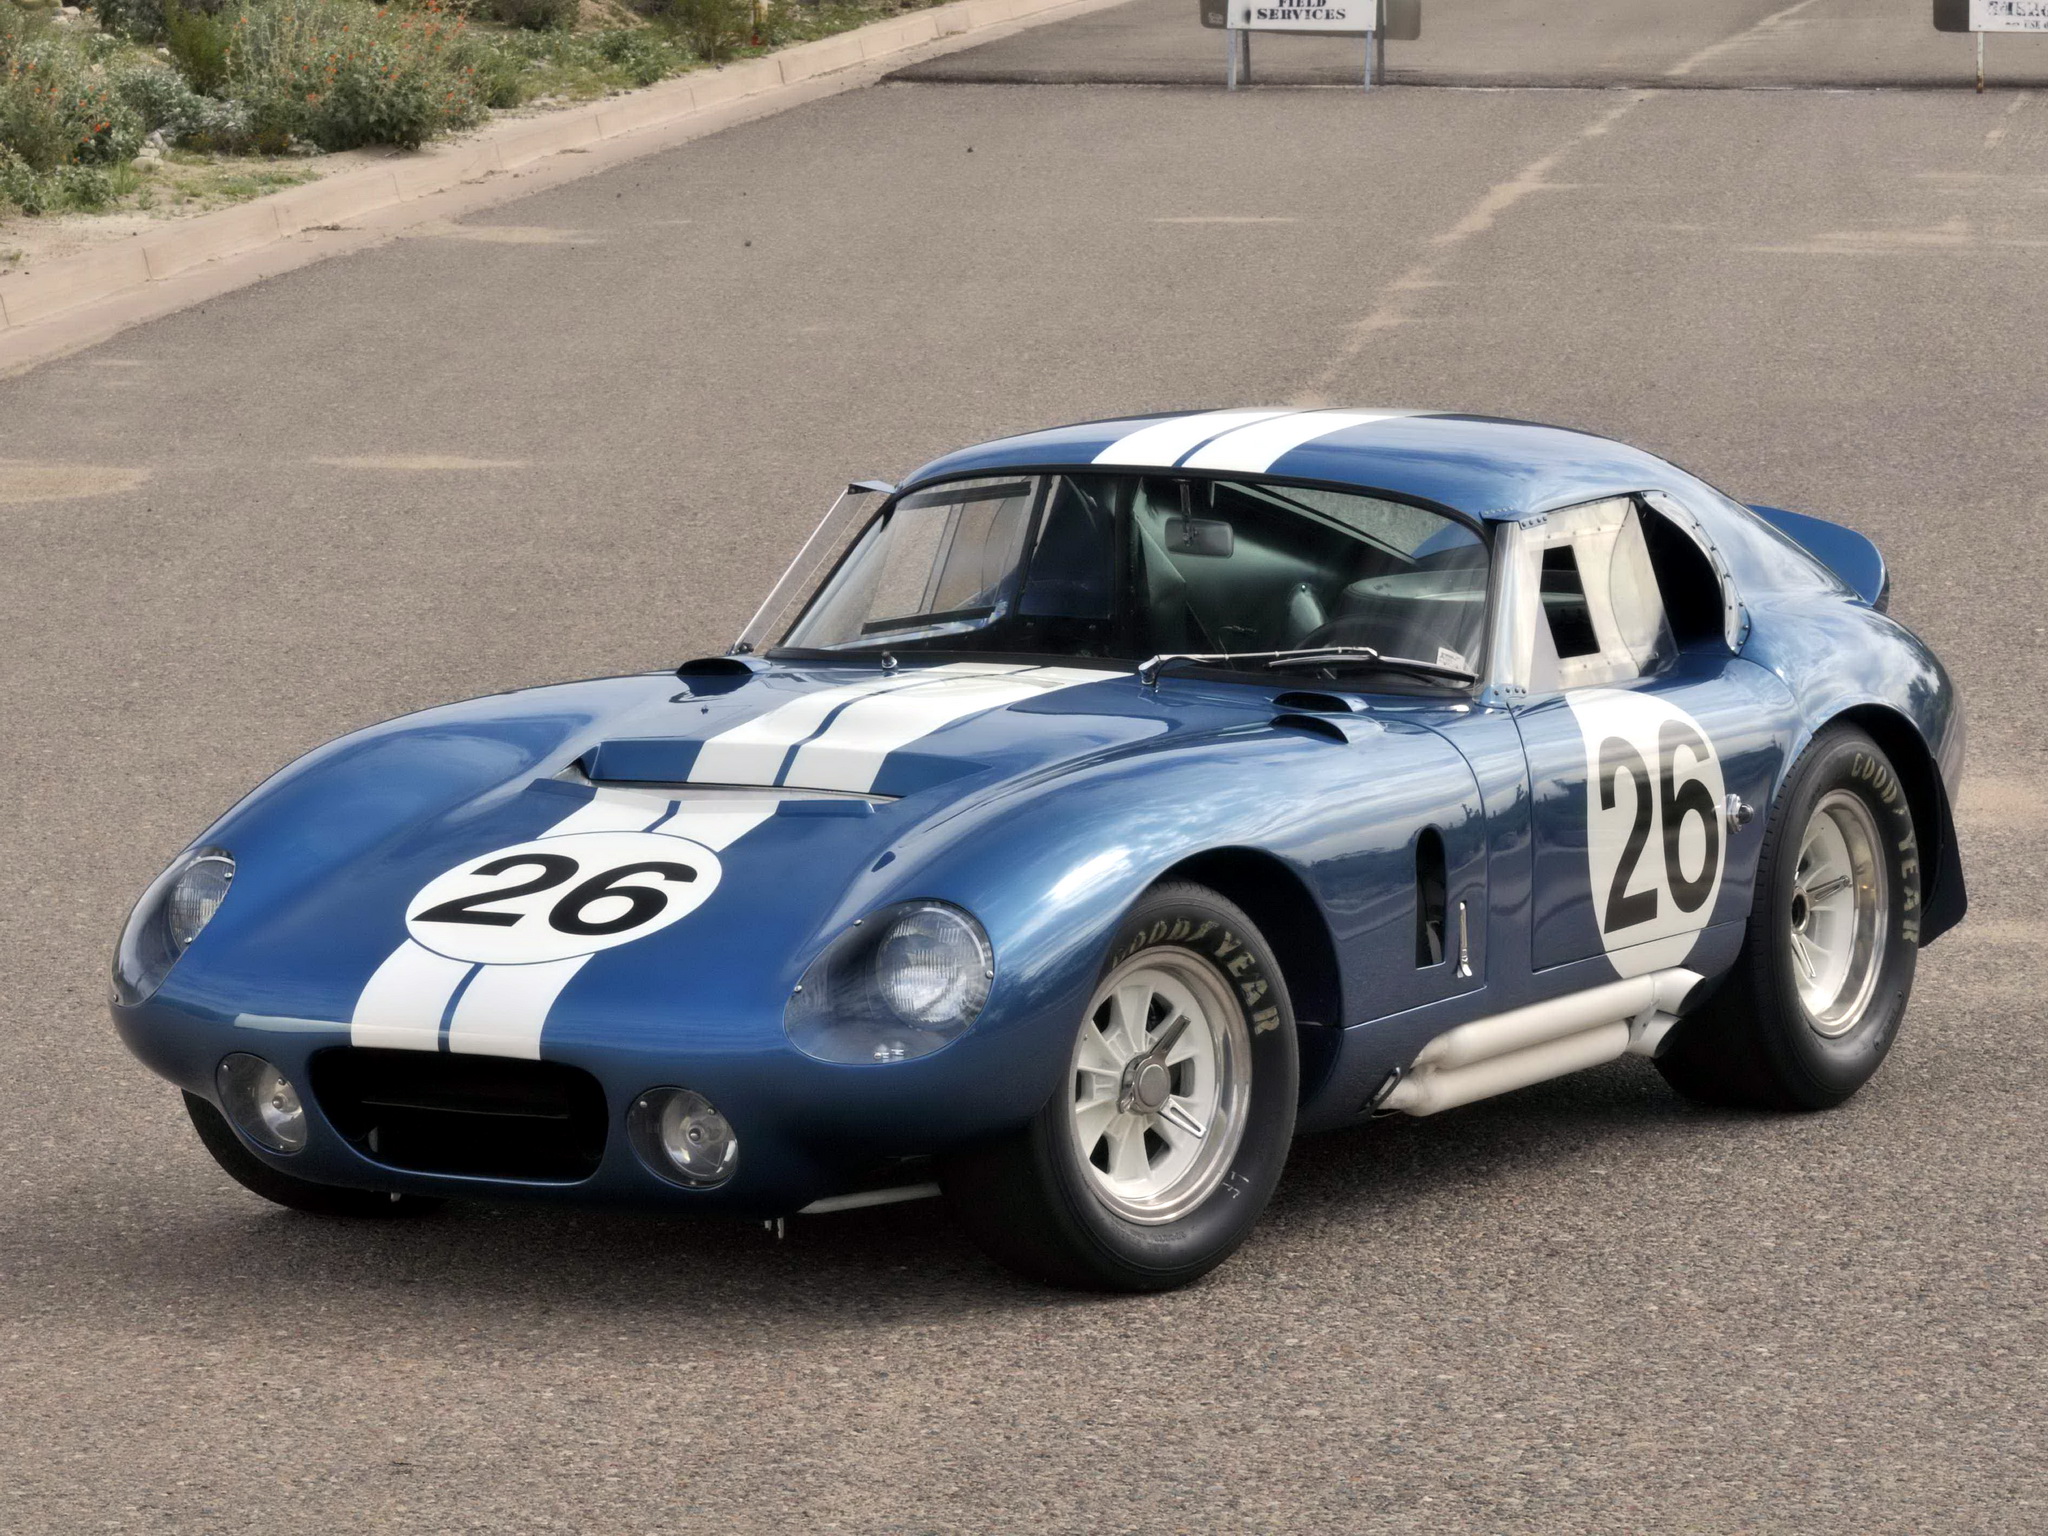 1964, Shelby, A c, Cobra, Daytona, Coupe, Race, Racing, Supercar, Supercars, Muscle, Classic Wallpaper